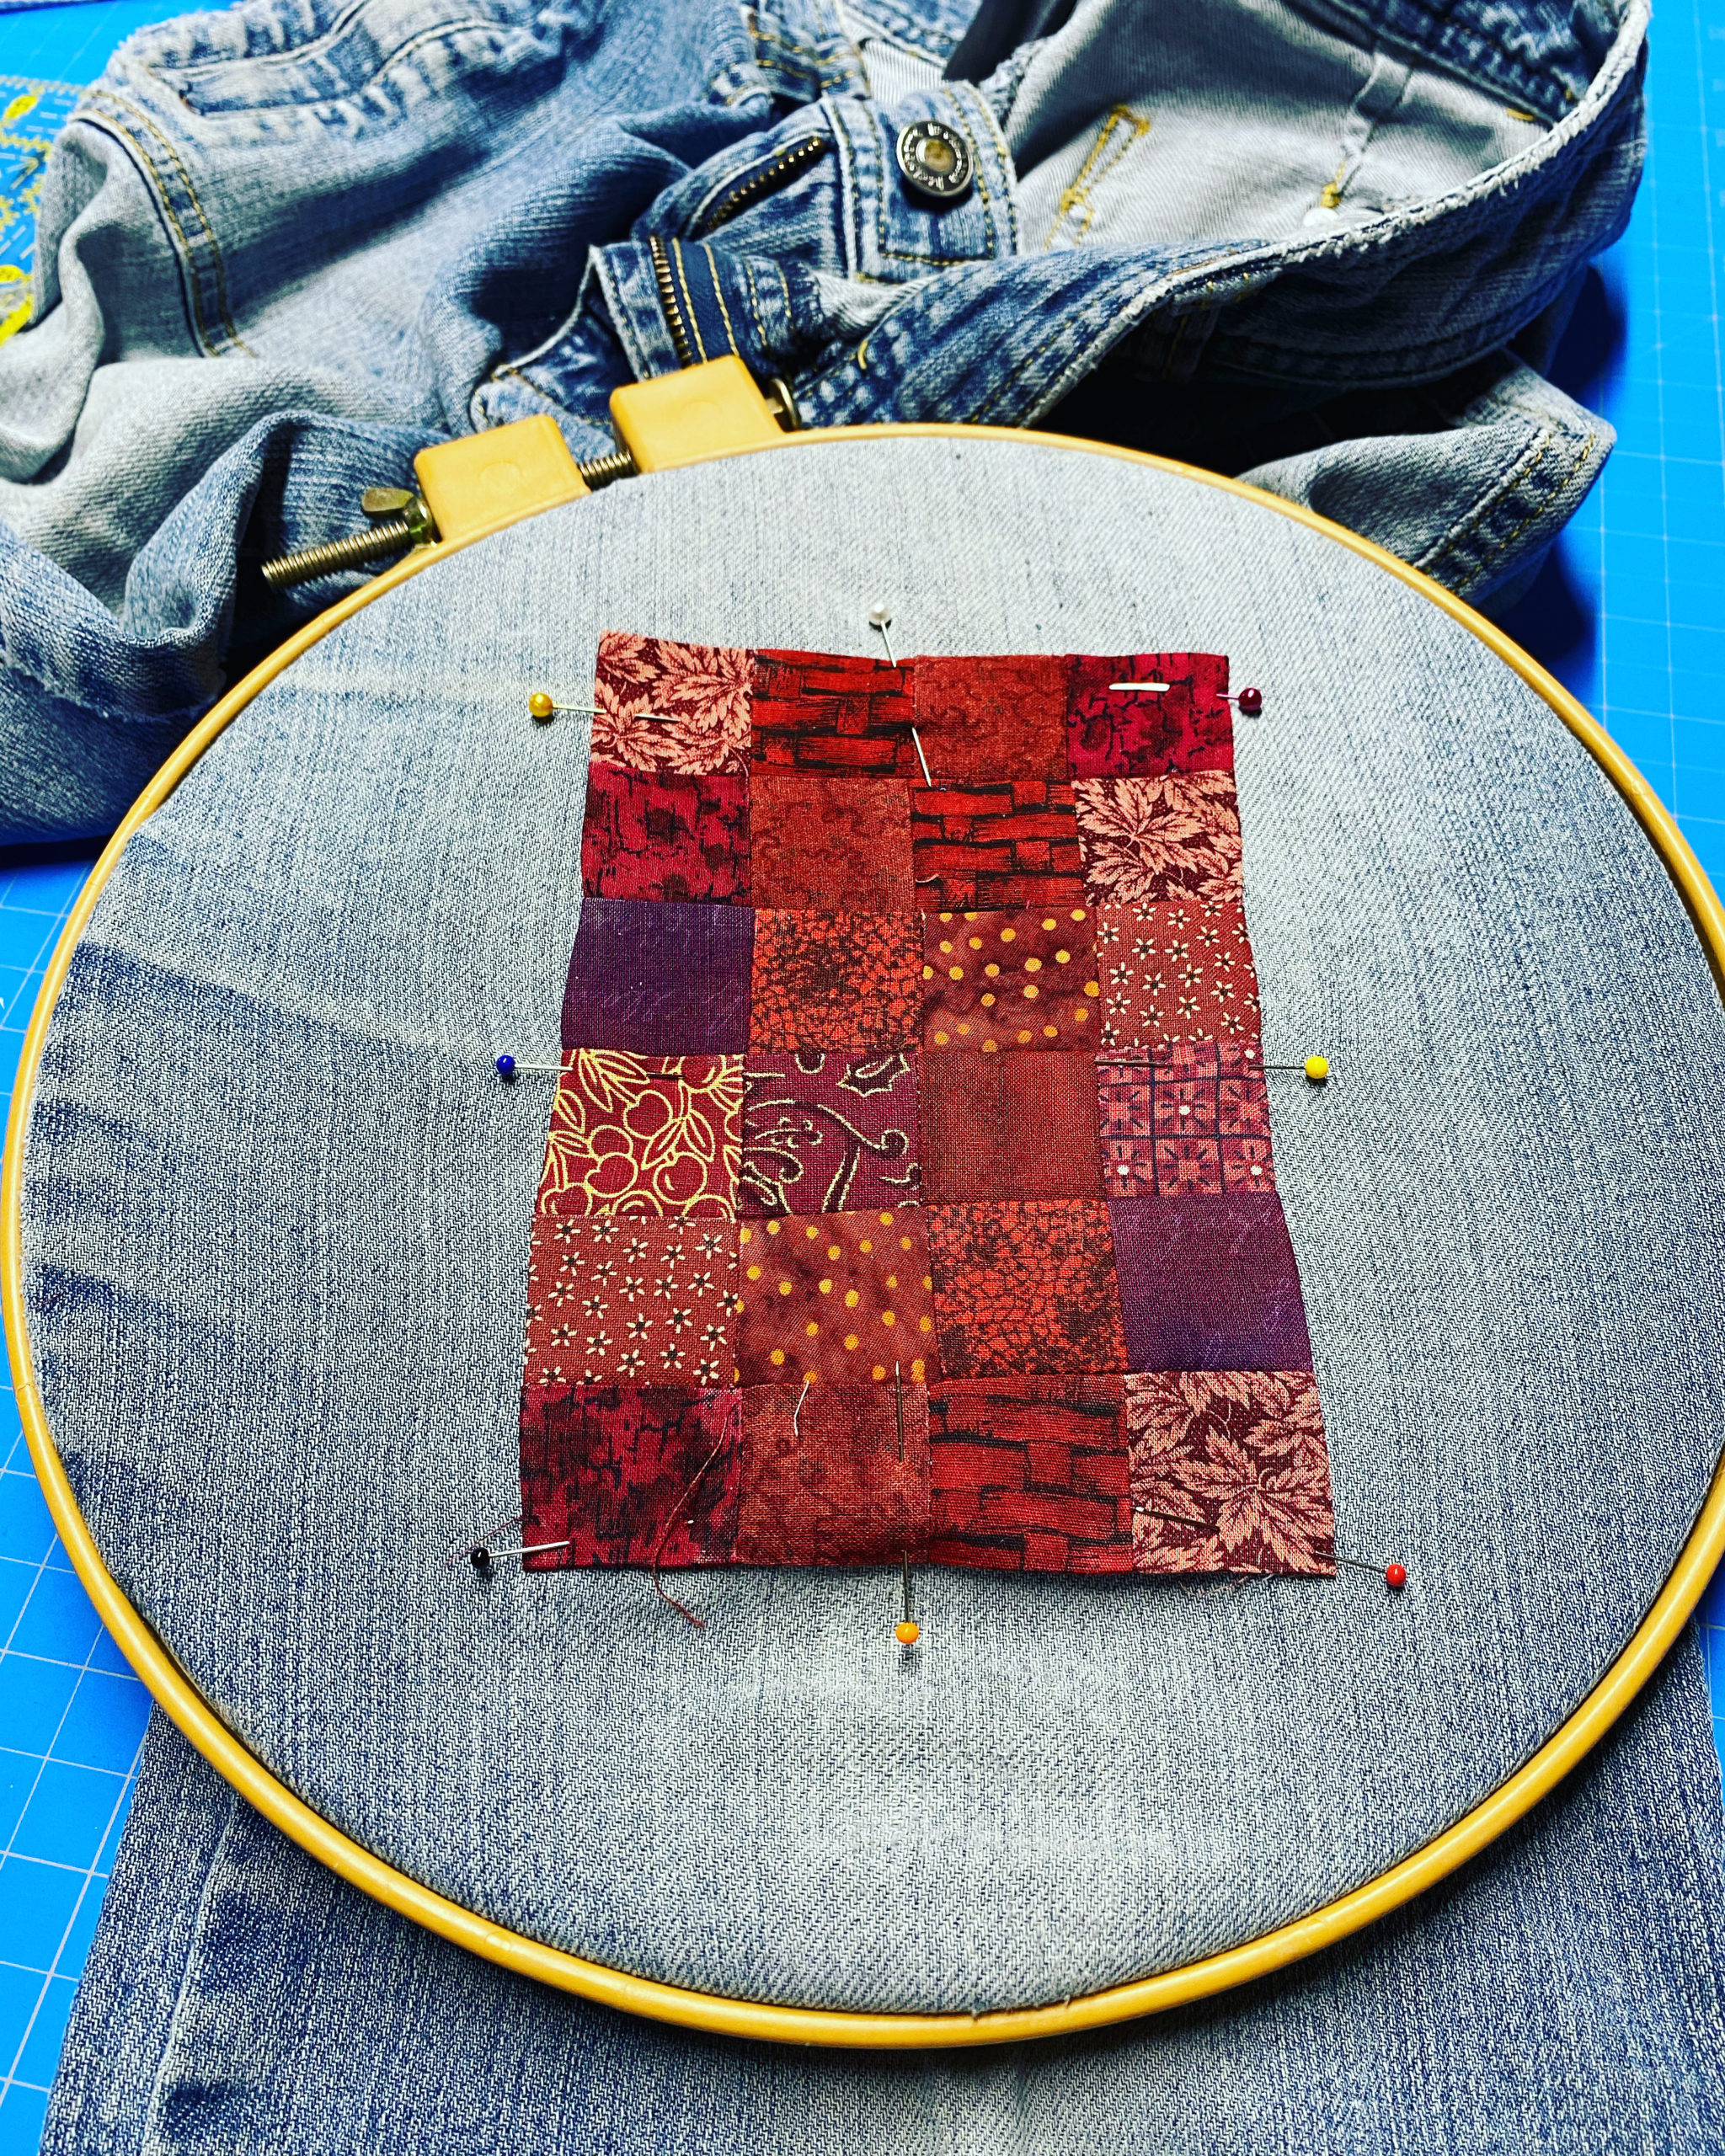 Angela of Artfully Sew used fabric scraps to make a patch for a pair of jeans.